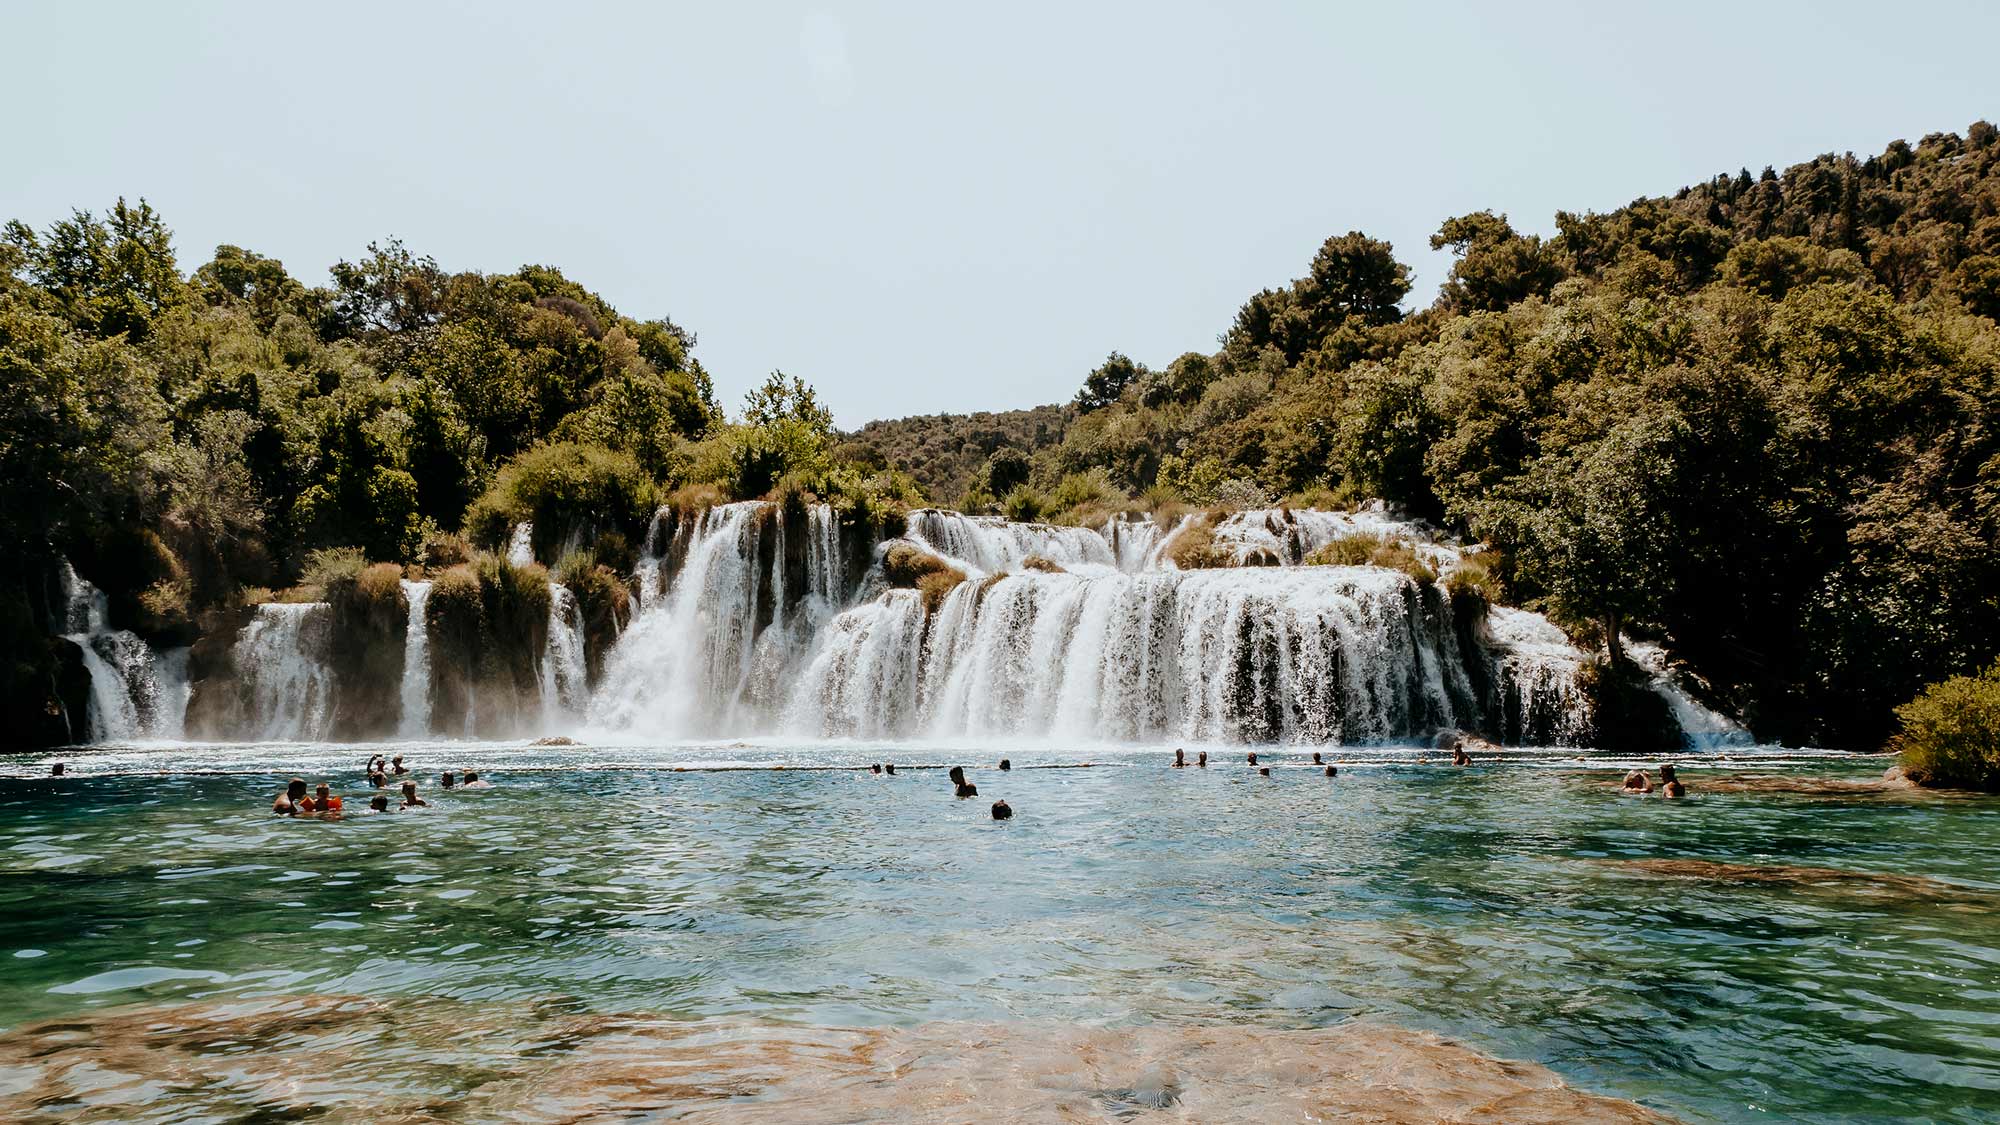 A travellers guide to Krka National Park